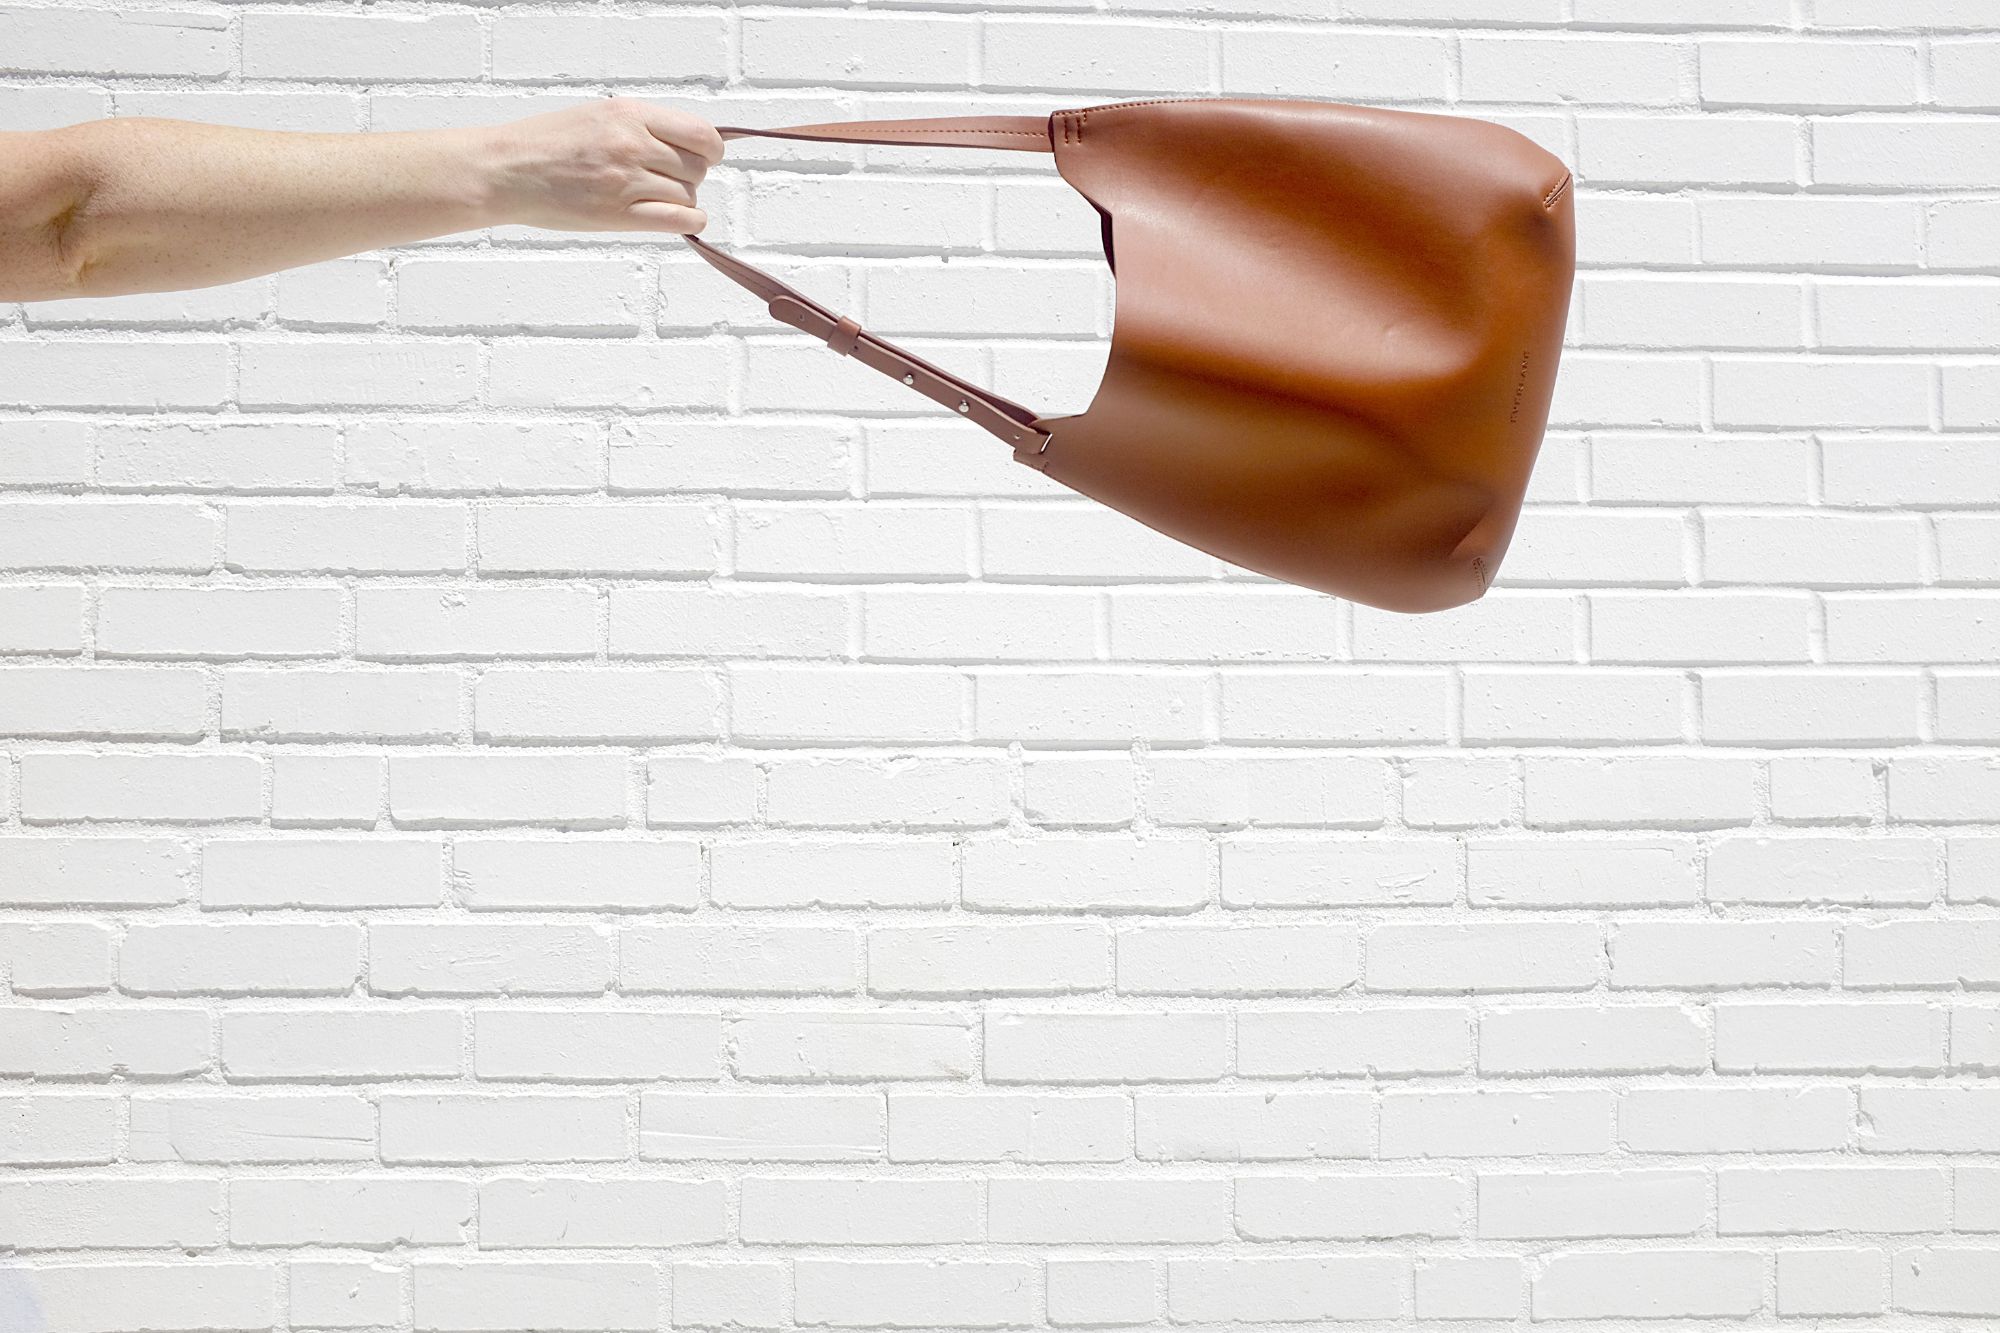 The Cactus Leather Hobo Bag is swung in the air